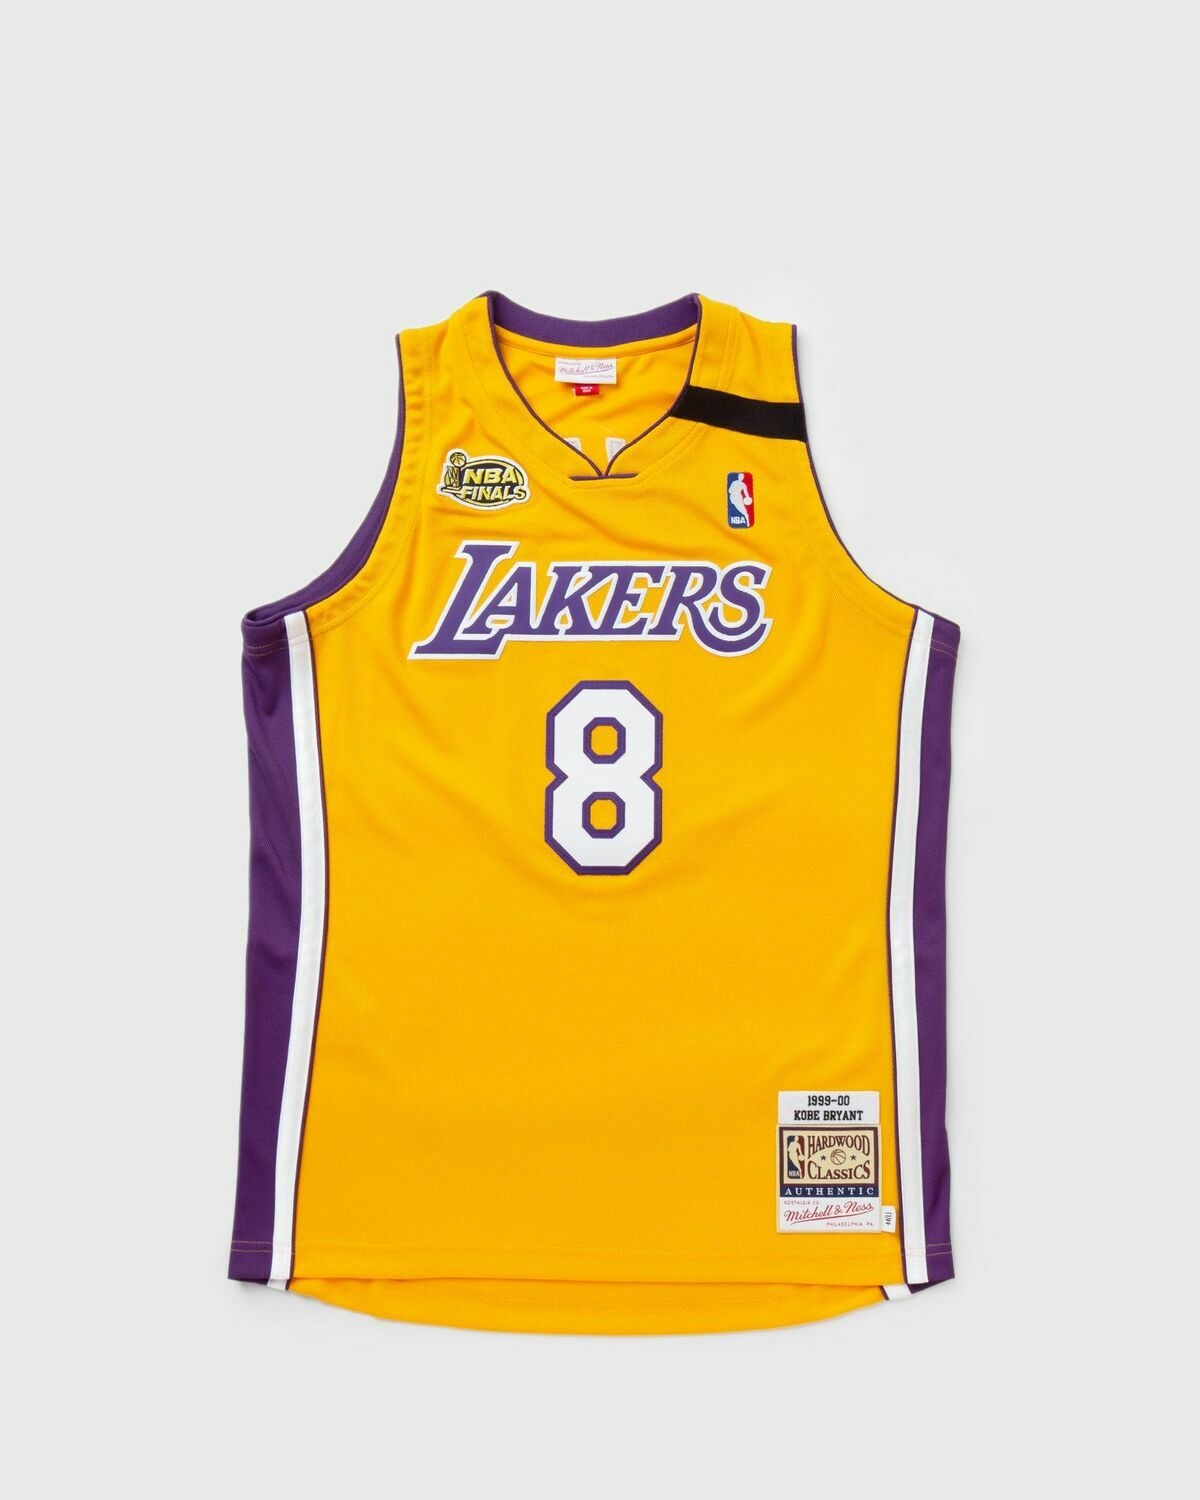 Mitchell & Ness Nba Authentic Jersey Los Angeles Lakers Finals 1999 00 Kobe Bryant #8 Yellow - Mens - Jerseys